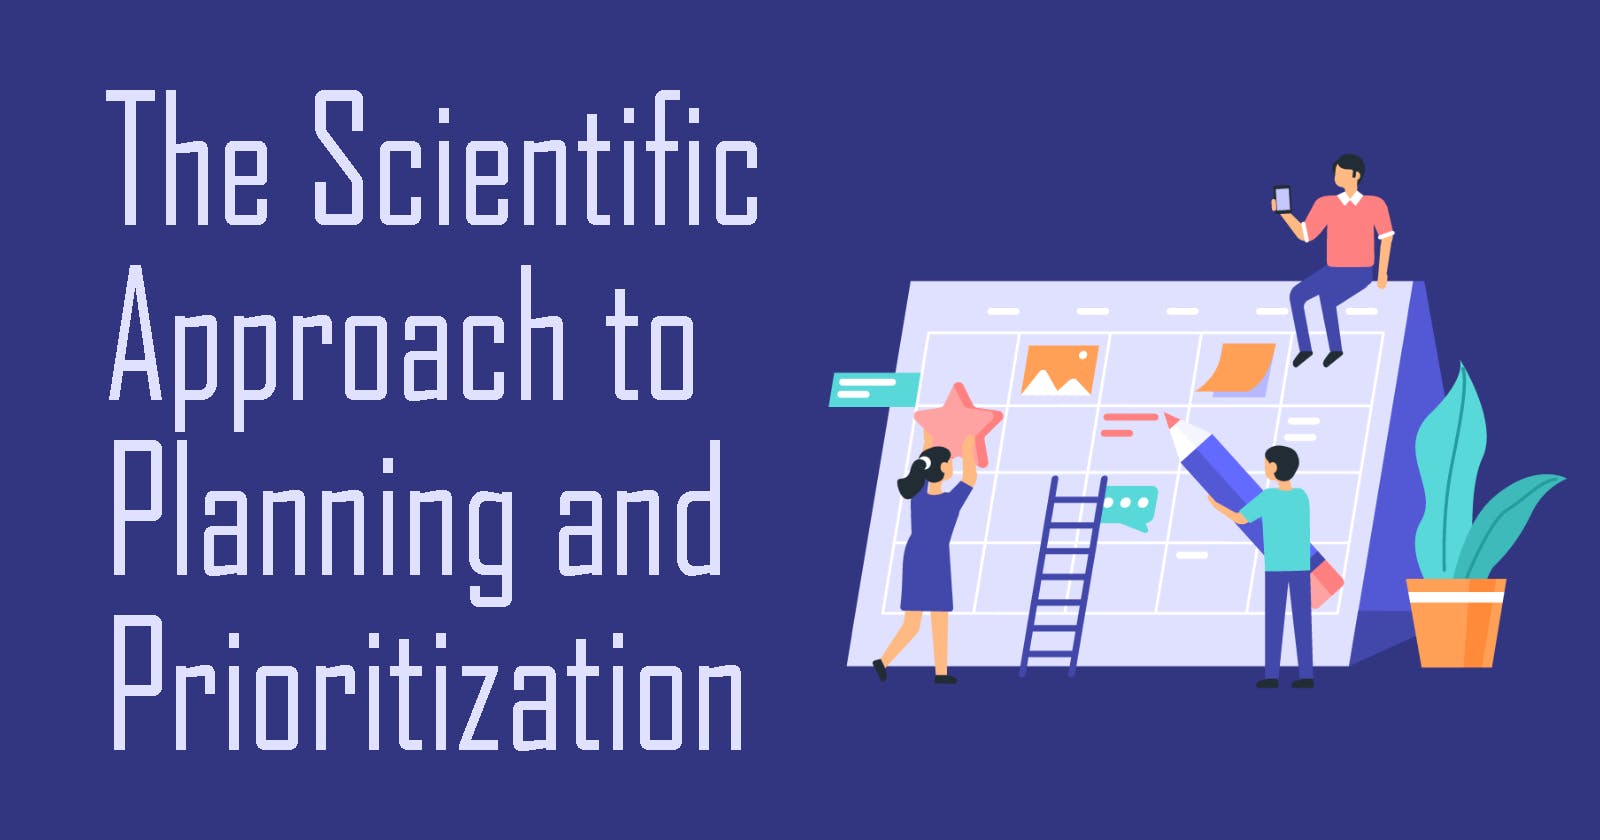 The Scientific Approach to Planning and Prioritization